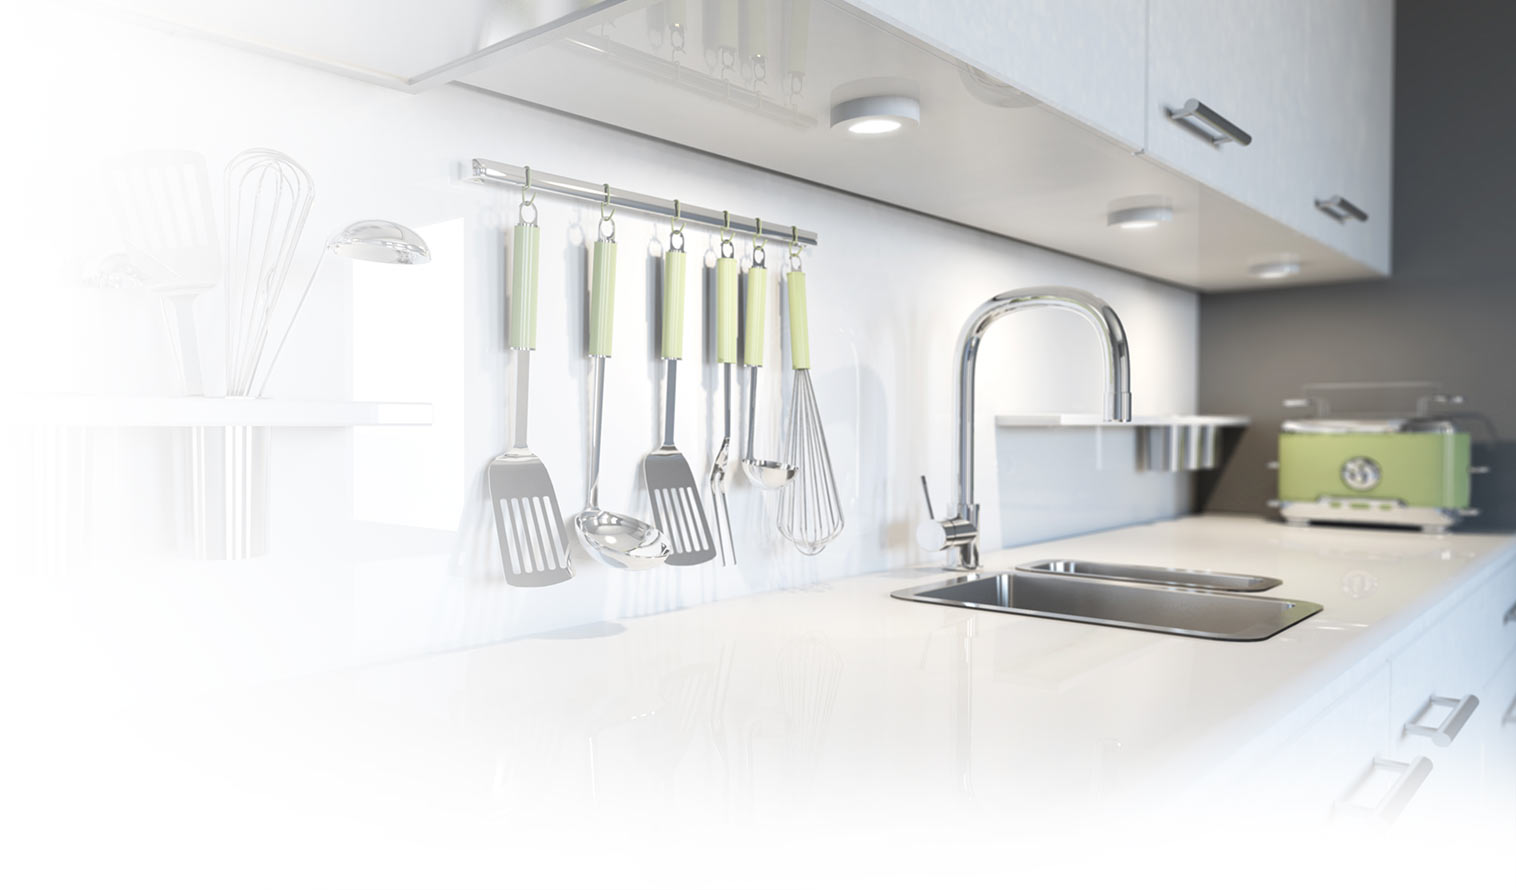 Kitchen faucets for conditioned water